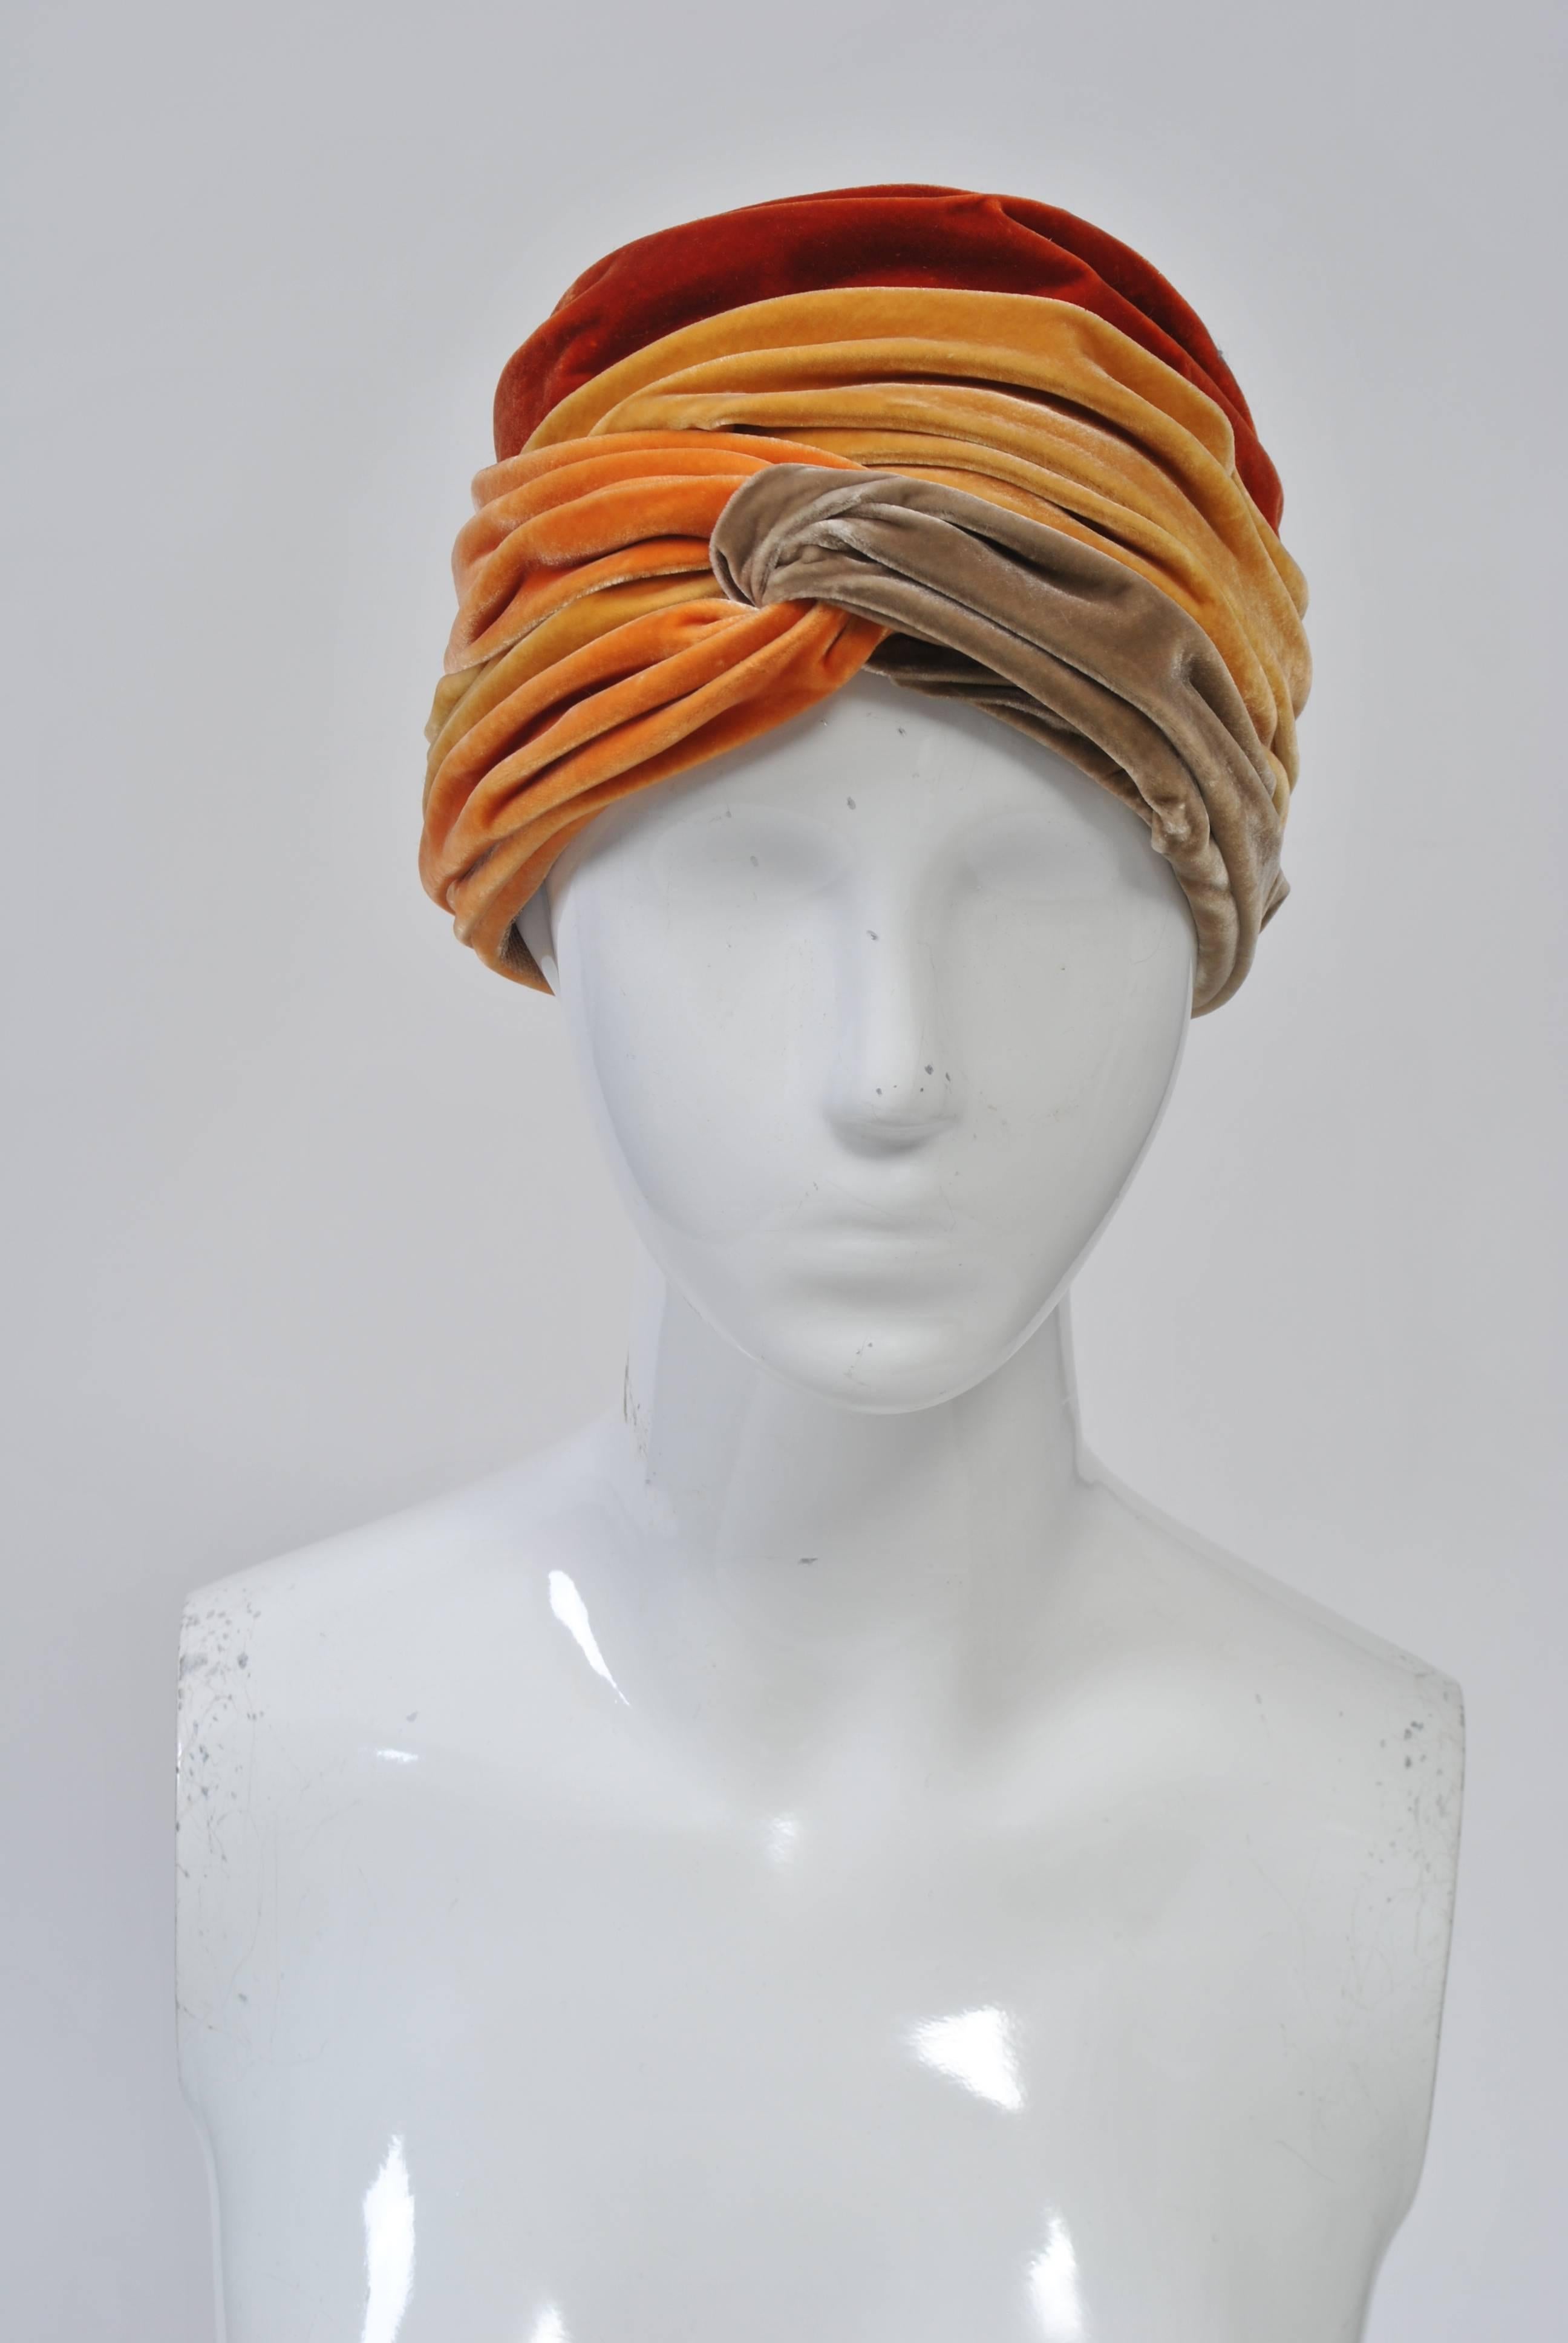 Velvet turban in orange, marigold, and taupe, c. 1960s, with net lining. Looks unworn. Made for Lord & Taylor. Size S-M.